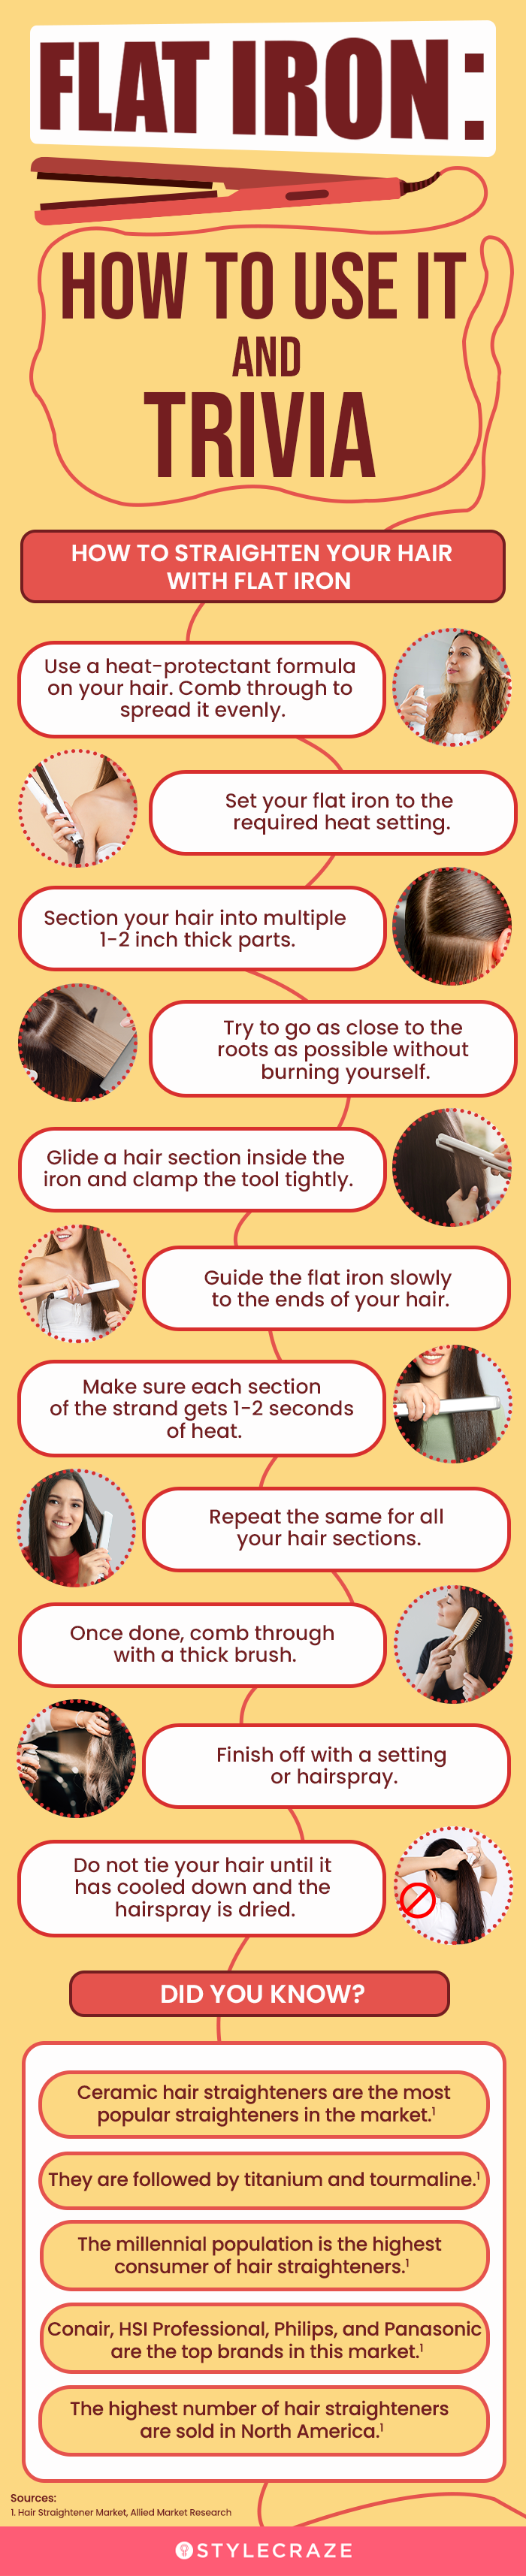 Flat Iron: How To Use It And Trivia Facts (infographic)